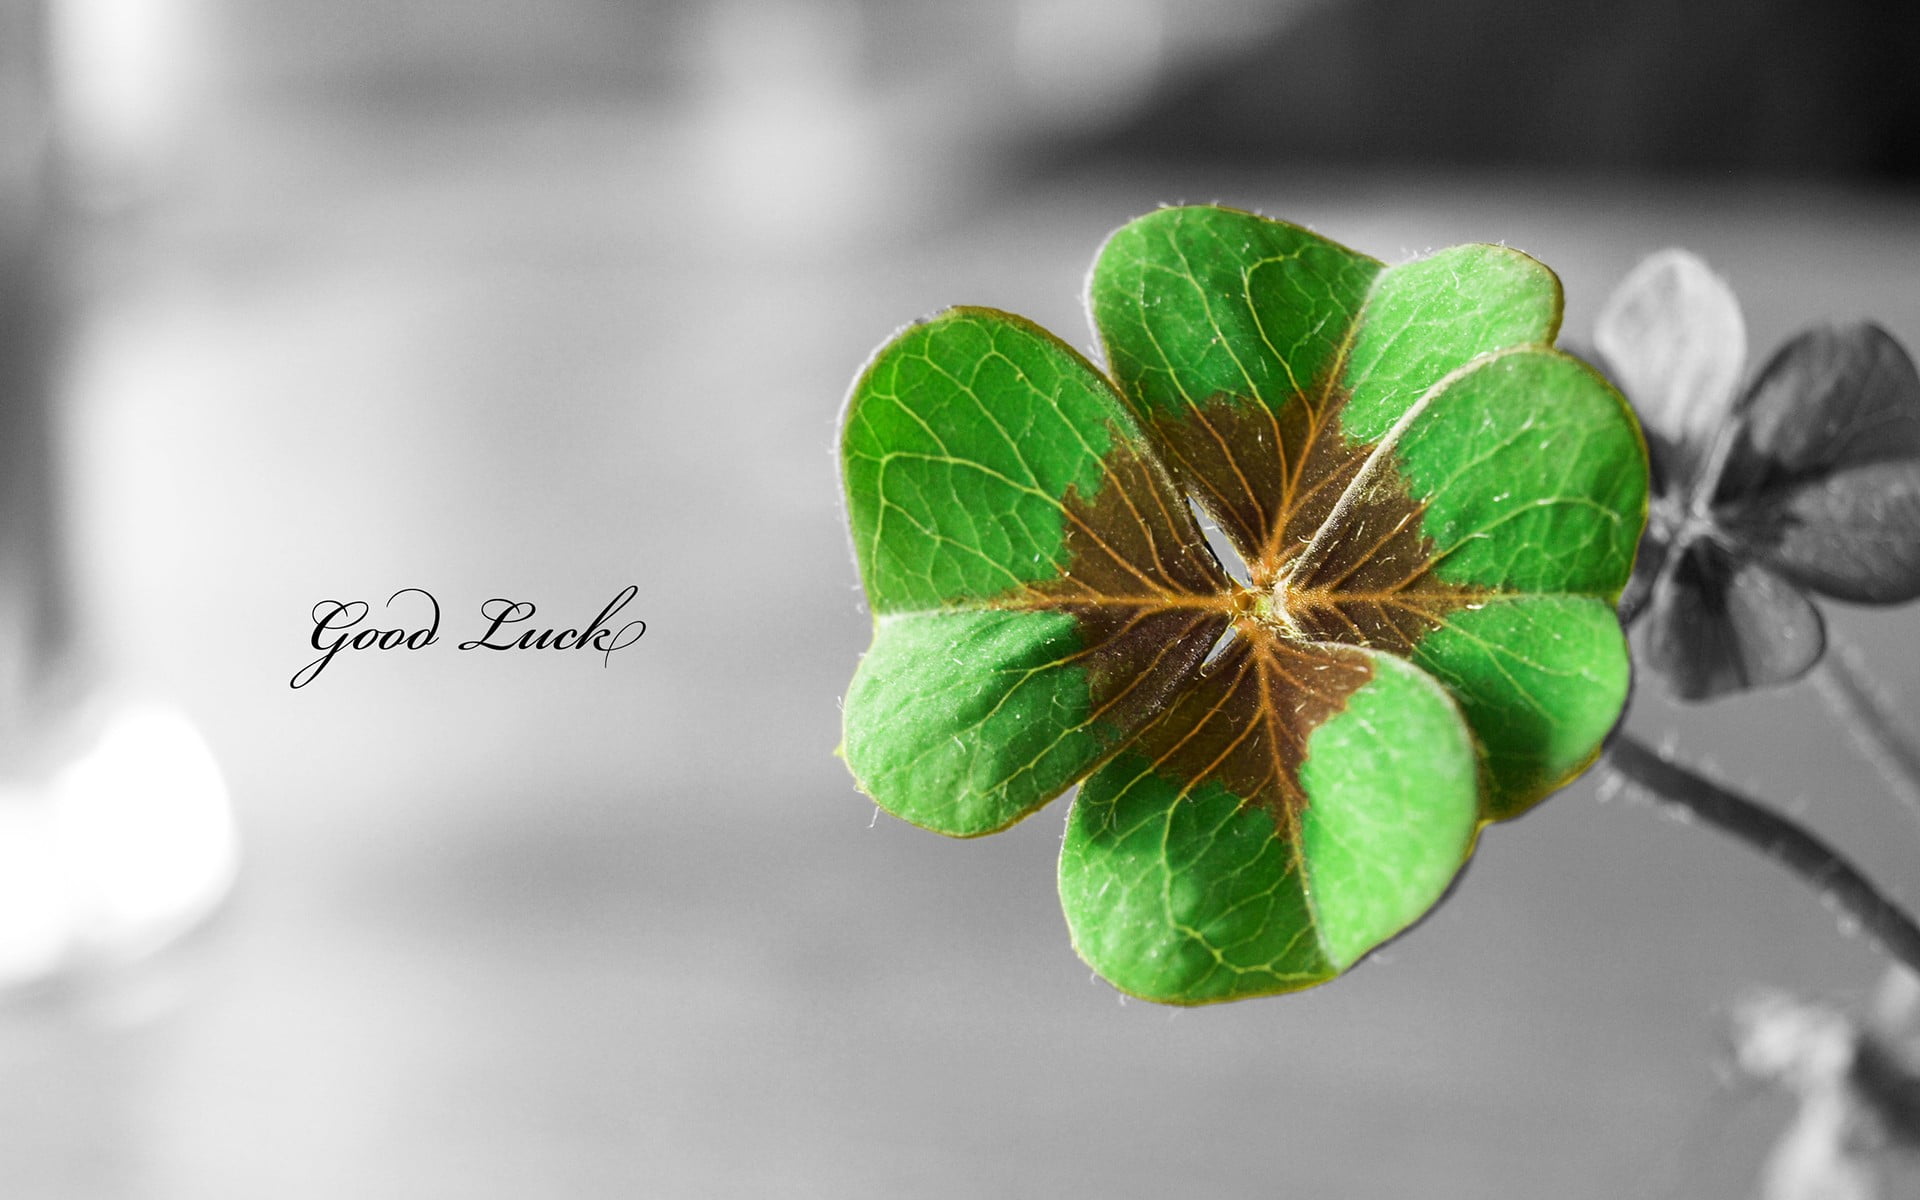 green 4-leaf clover with Good luck text overlay, clovers, selective coloring